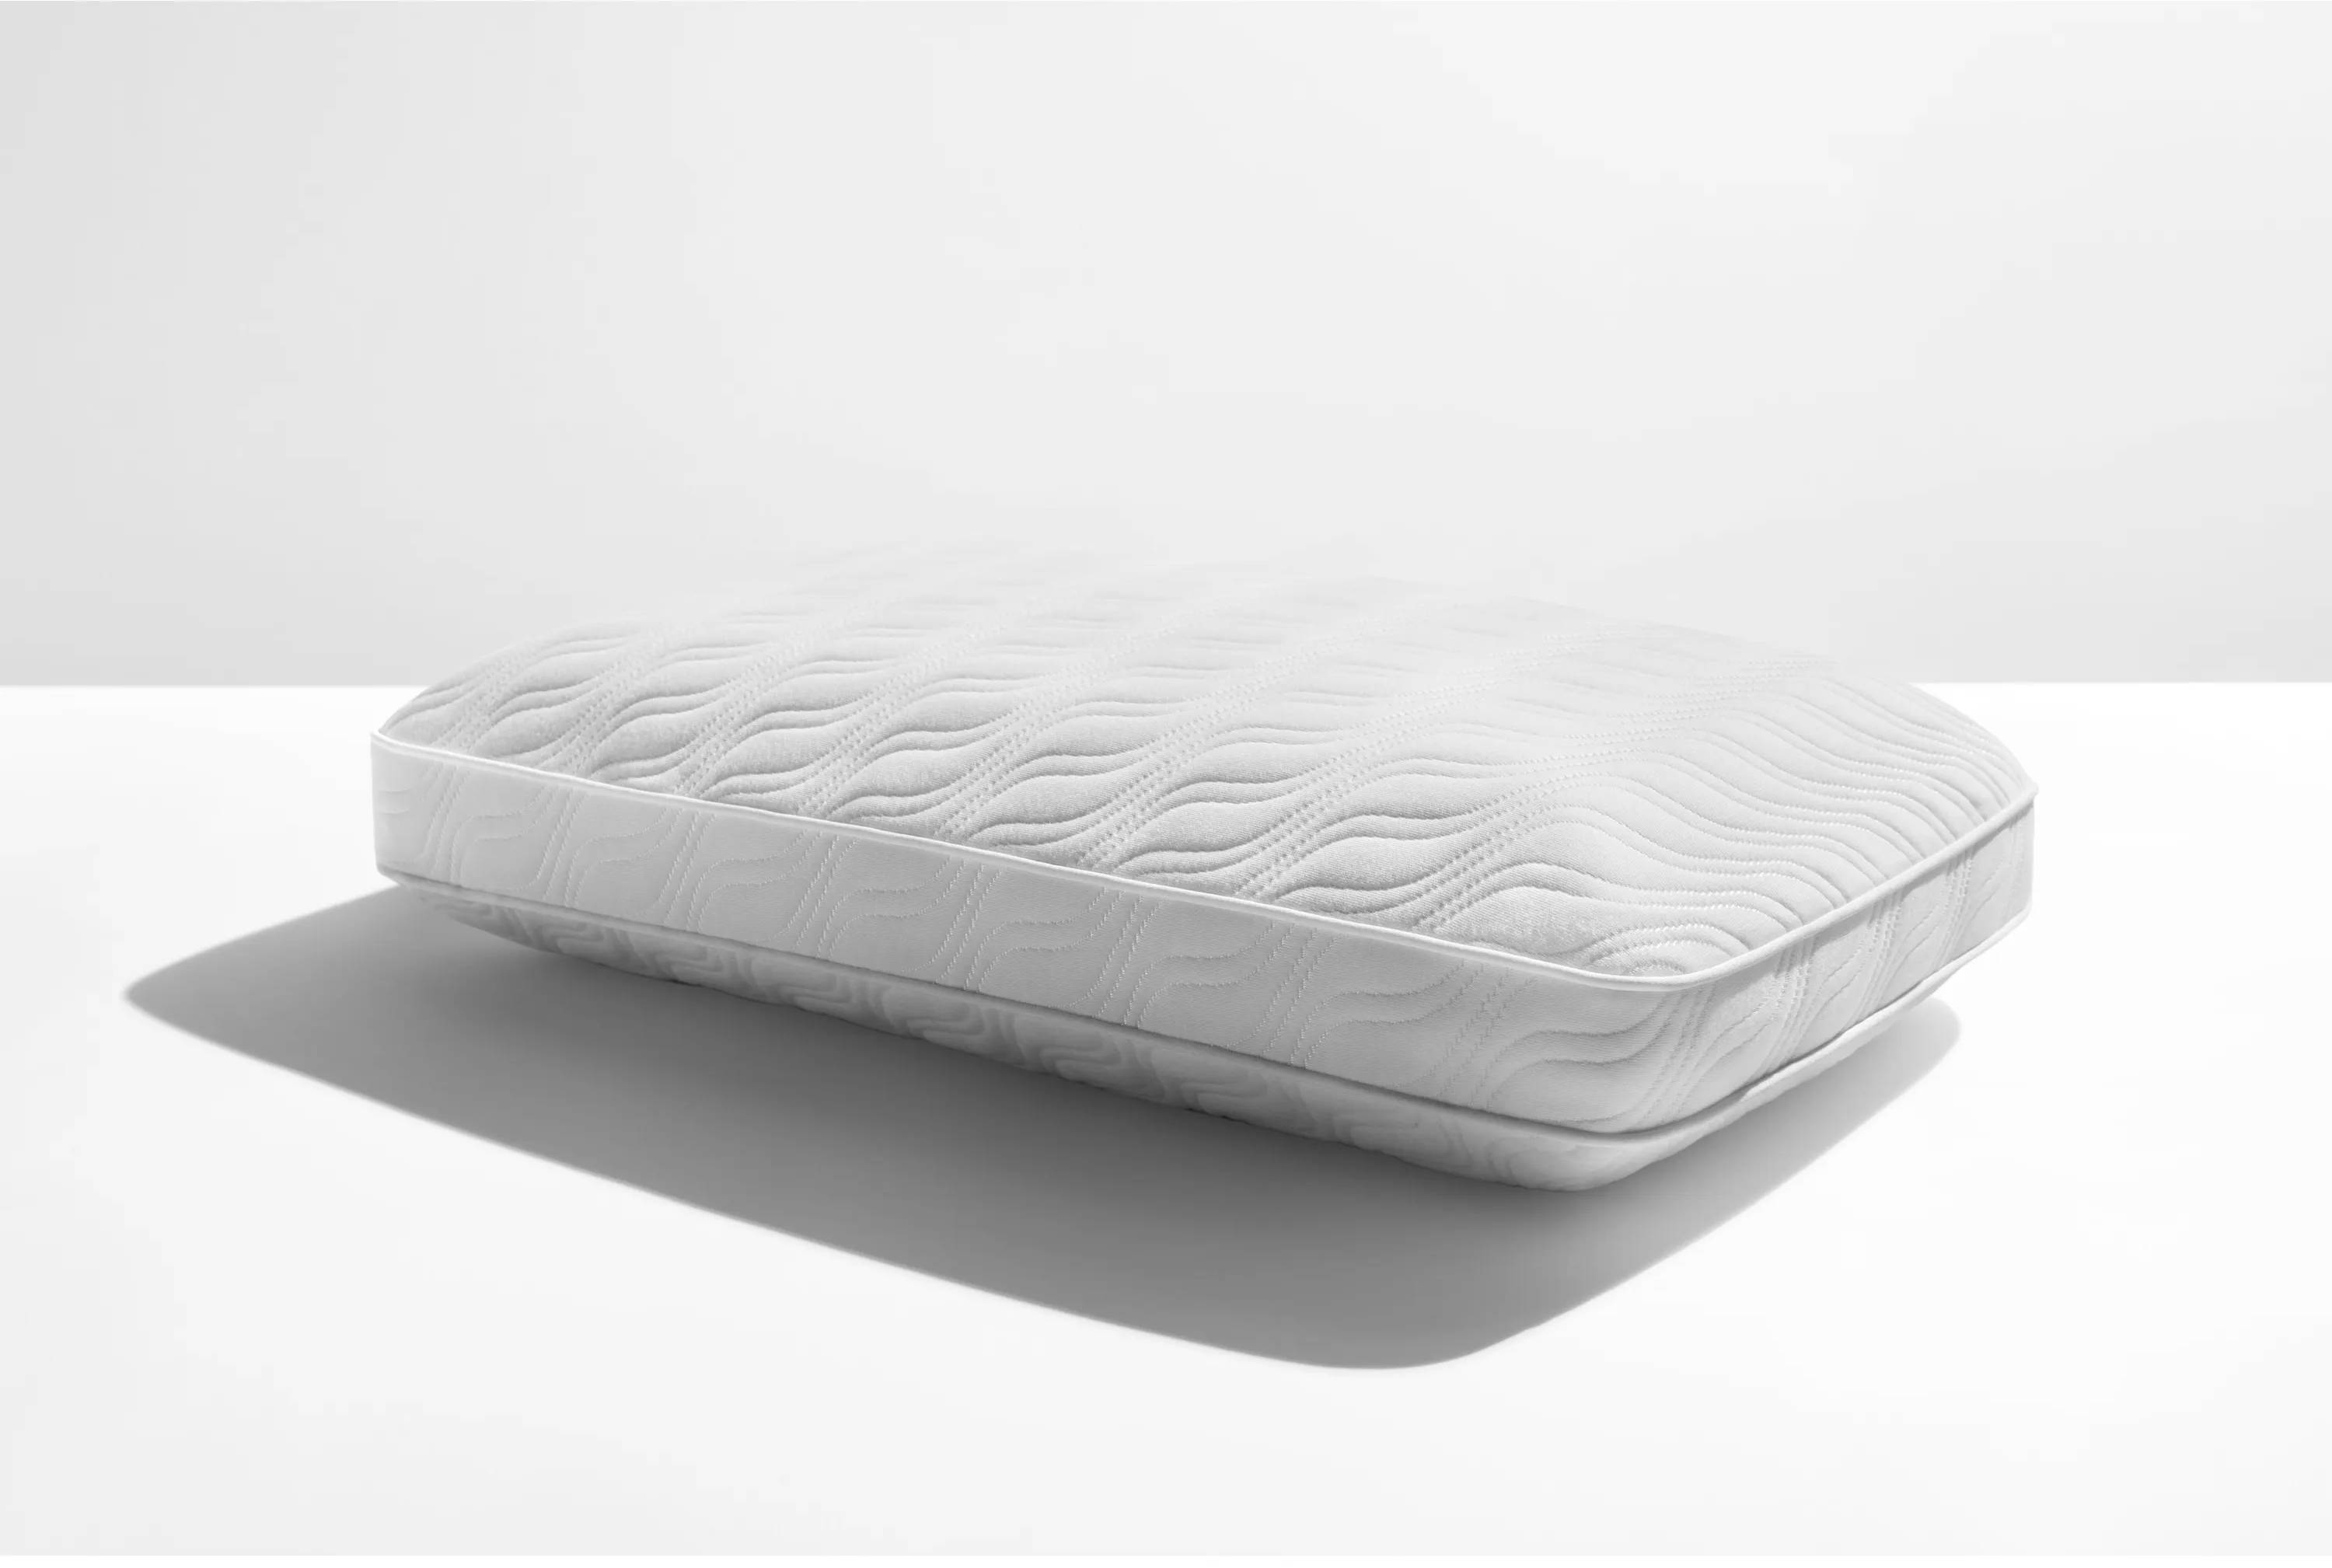 A high profile pillow made for neck and head elevation.